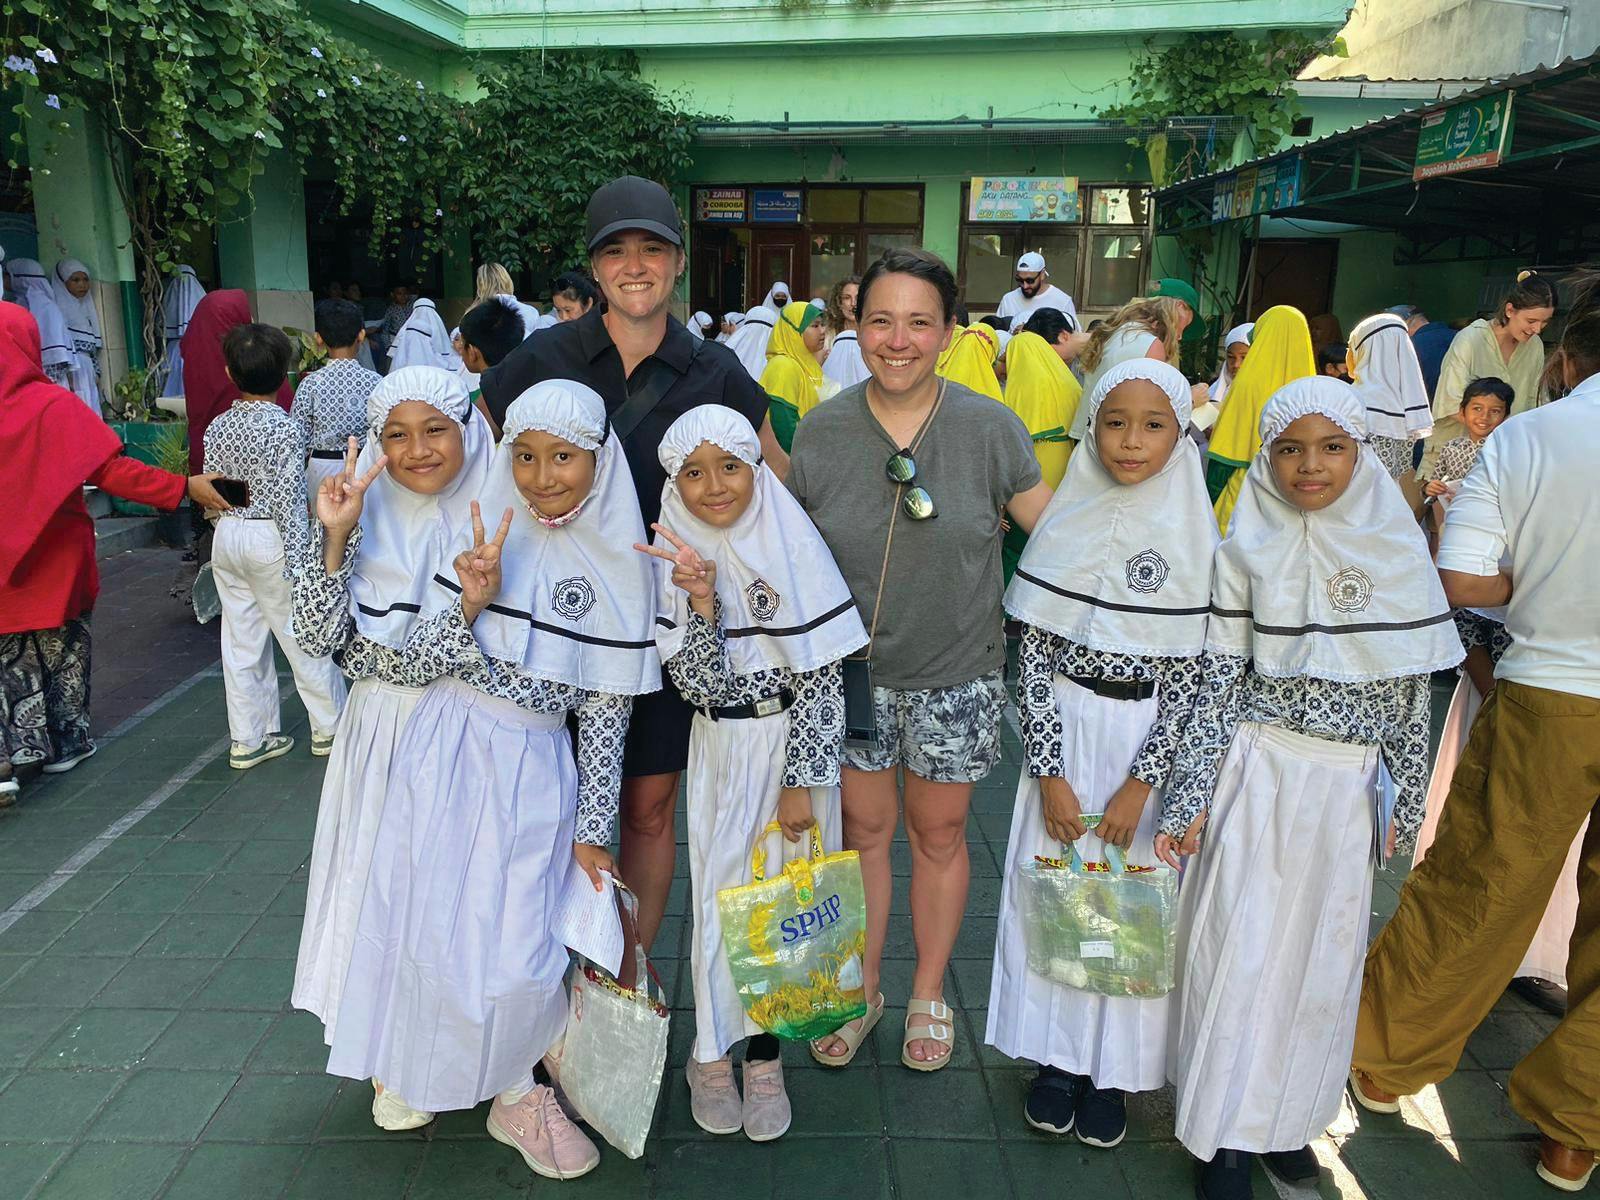 Visiting one of the local schools that partners with Plastic Bank to educate younger generations about the importance of recycling. (Jenna Van Thof from CooperVision joins the author in this photo.)